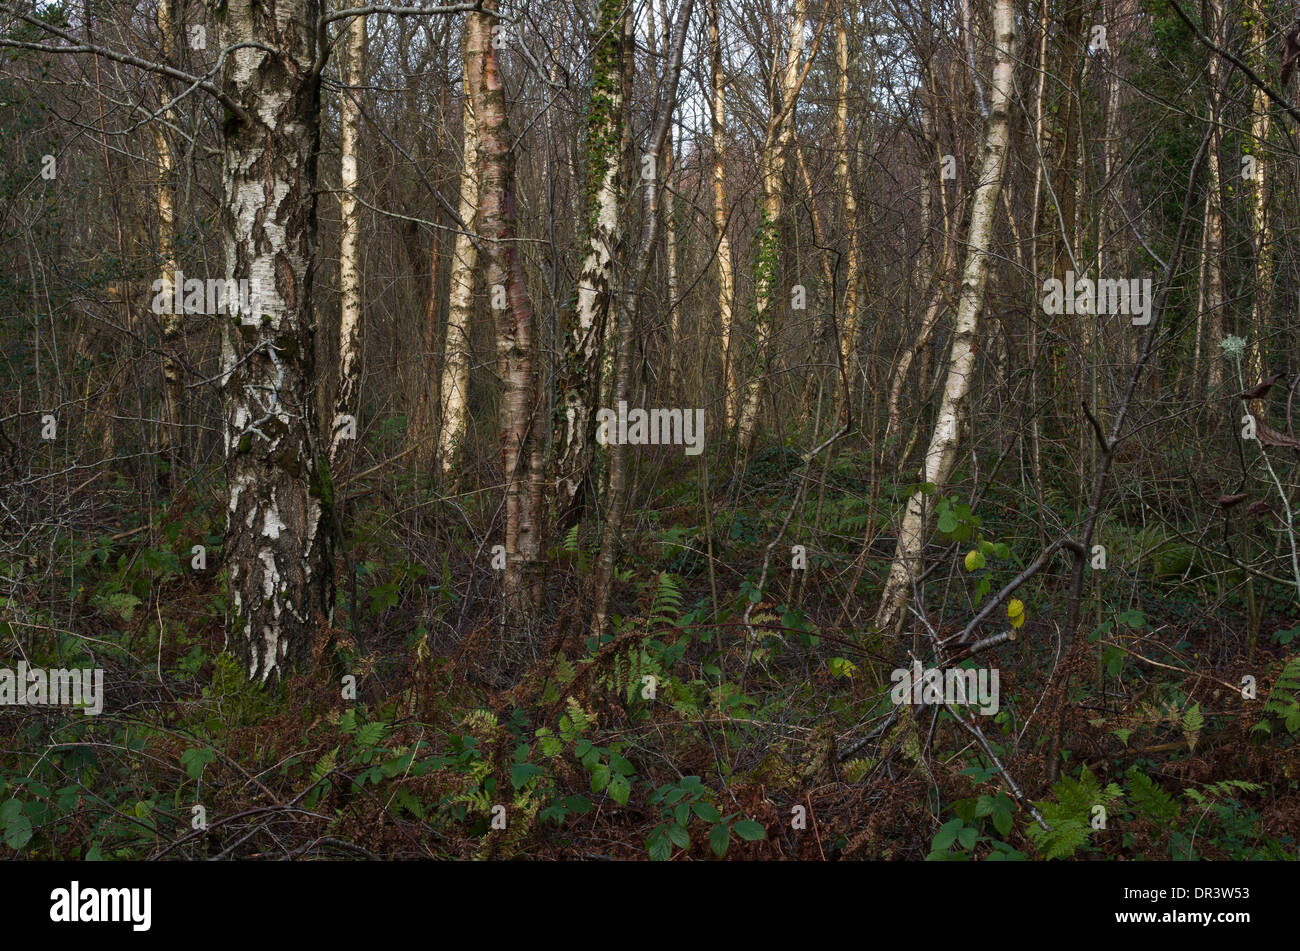 Birch is a pioneer tree quickly establishing woodland, sometimes in quite hostile environments. Stock Photo